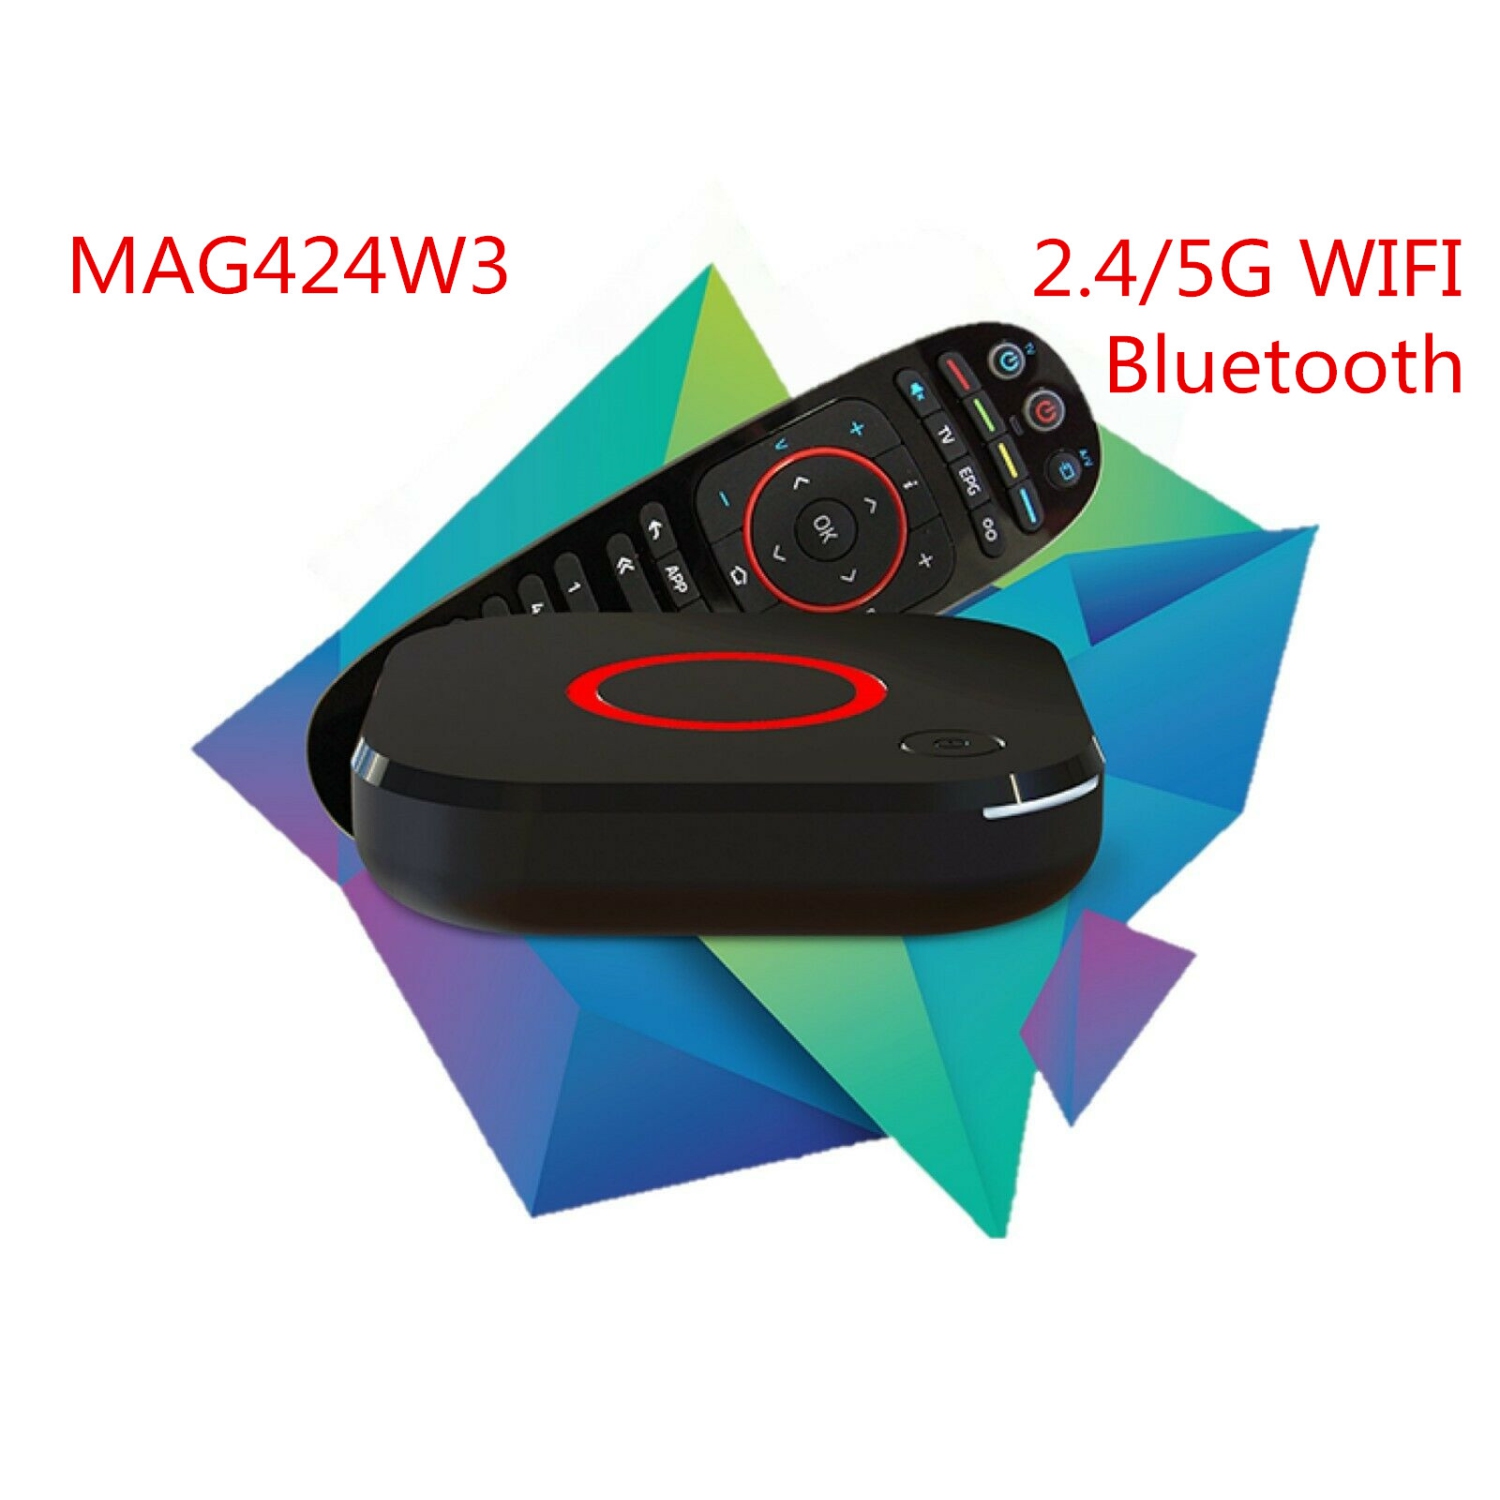 2020 Infomir Genuine MAG424W3 IPTV OTT Set Top Box TV STB Wifi Bluetooth updated MAG322W1 MAG324W2 with Free Lixsuntek ® cable